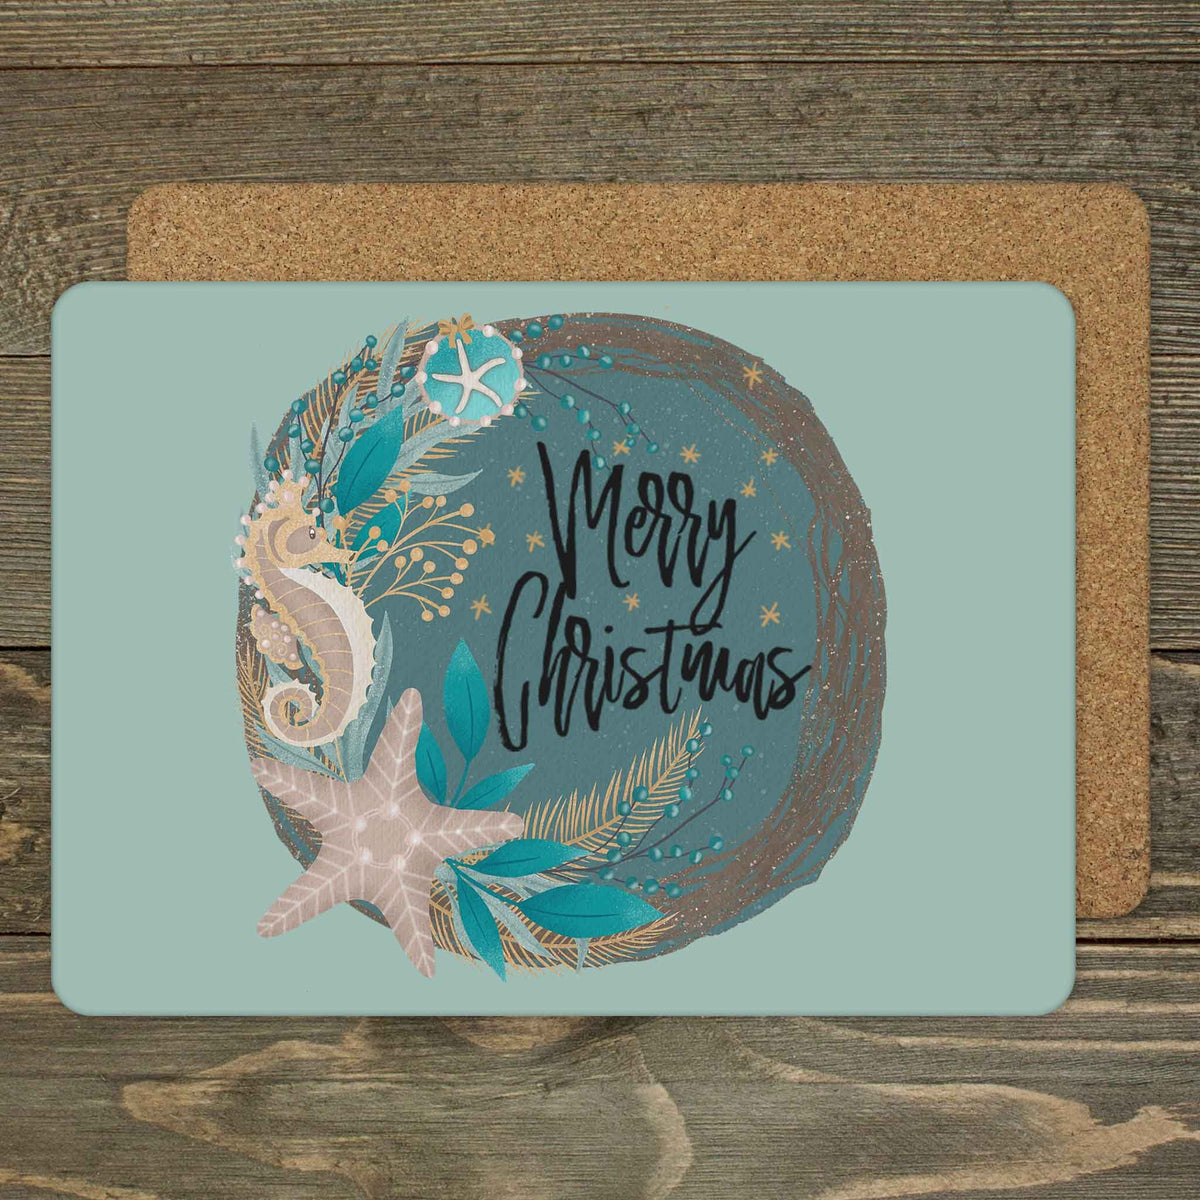 Custom Placemats | Personalized Dining and Serving | Seahorse Wreath